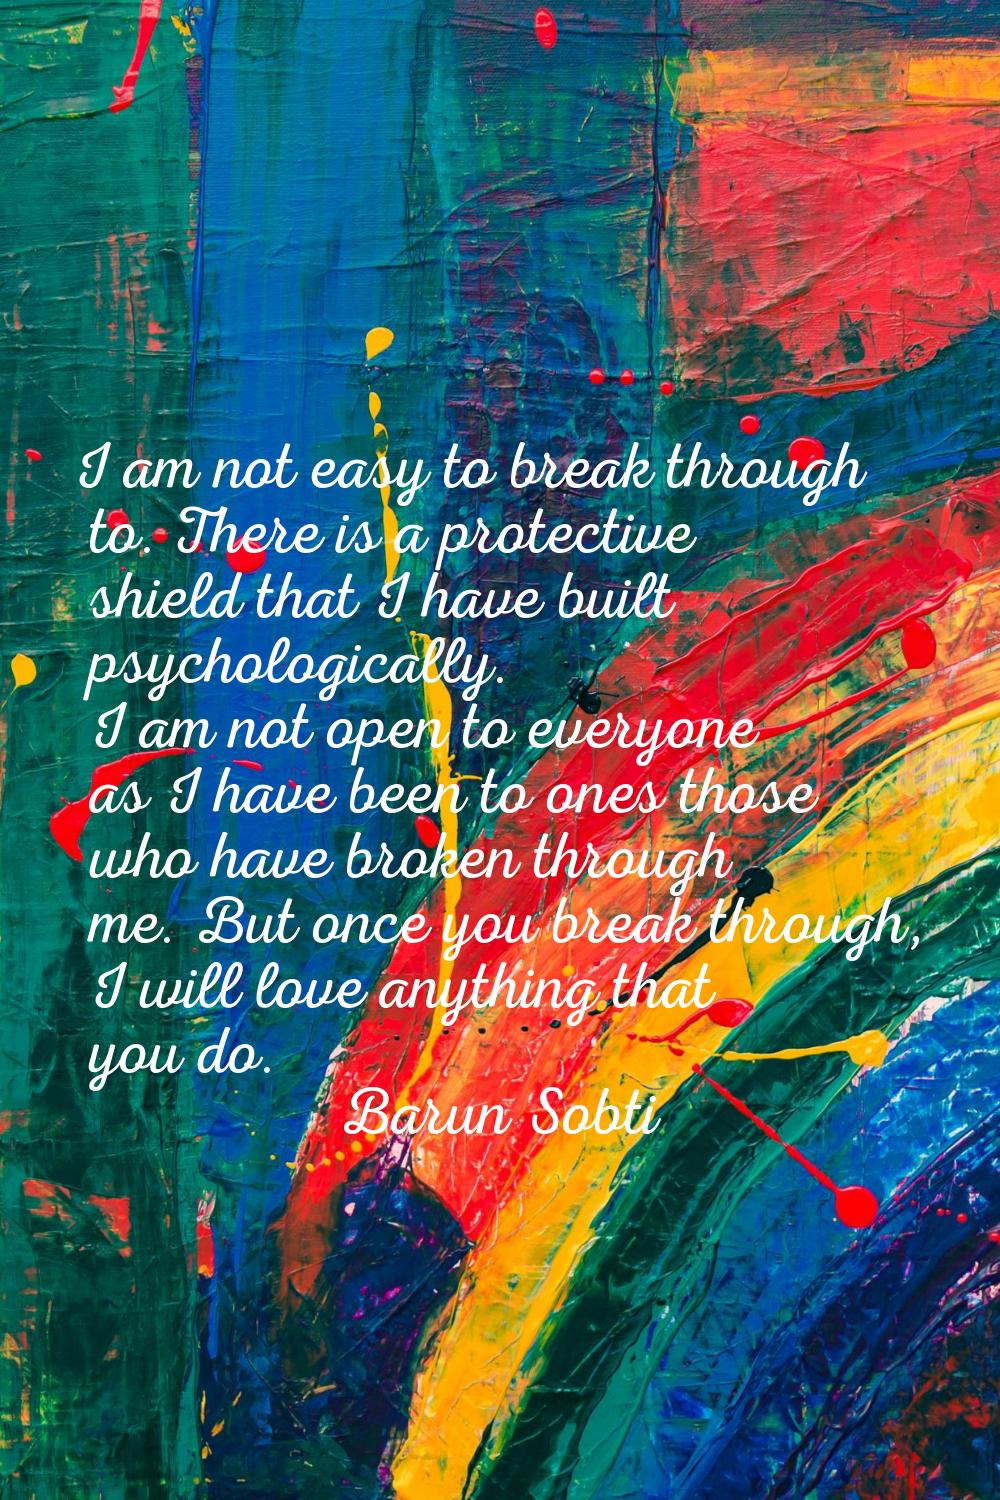 I am not easy to break through to. There is a protective shield that I have built psychologically. 